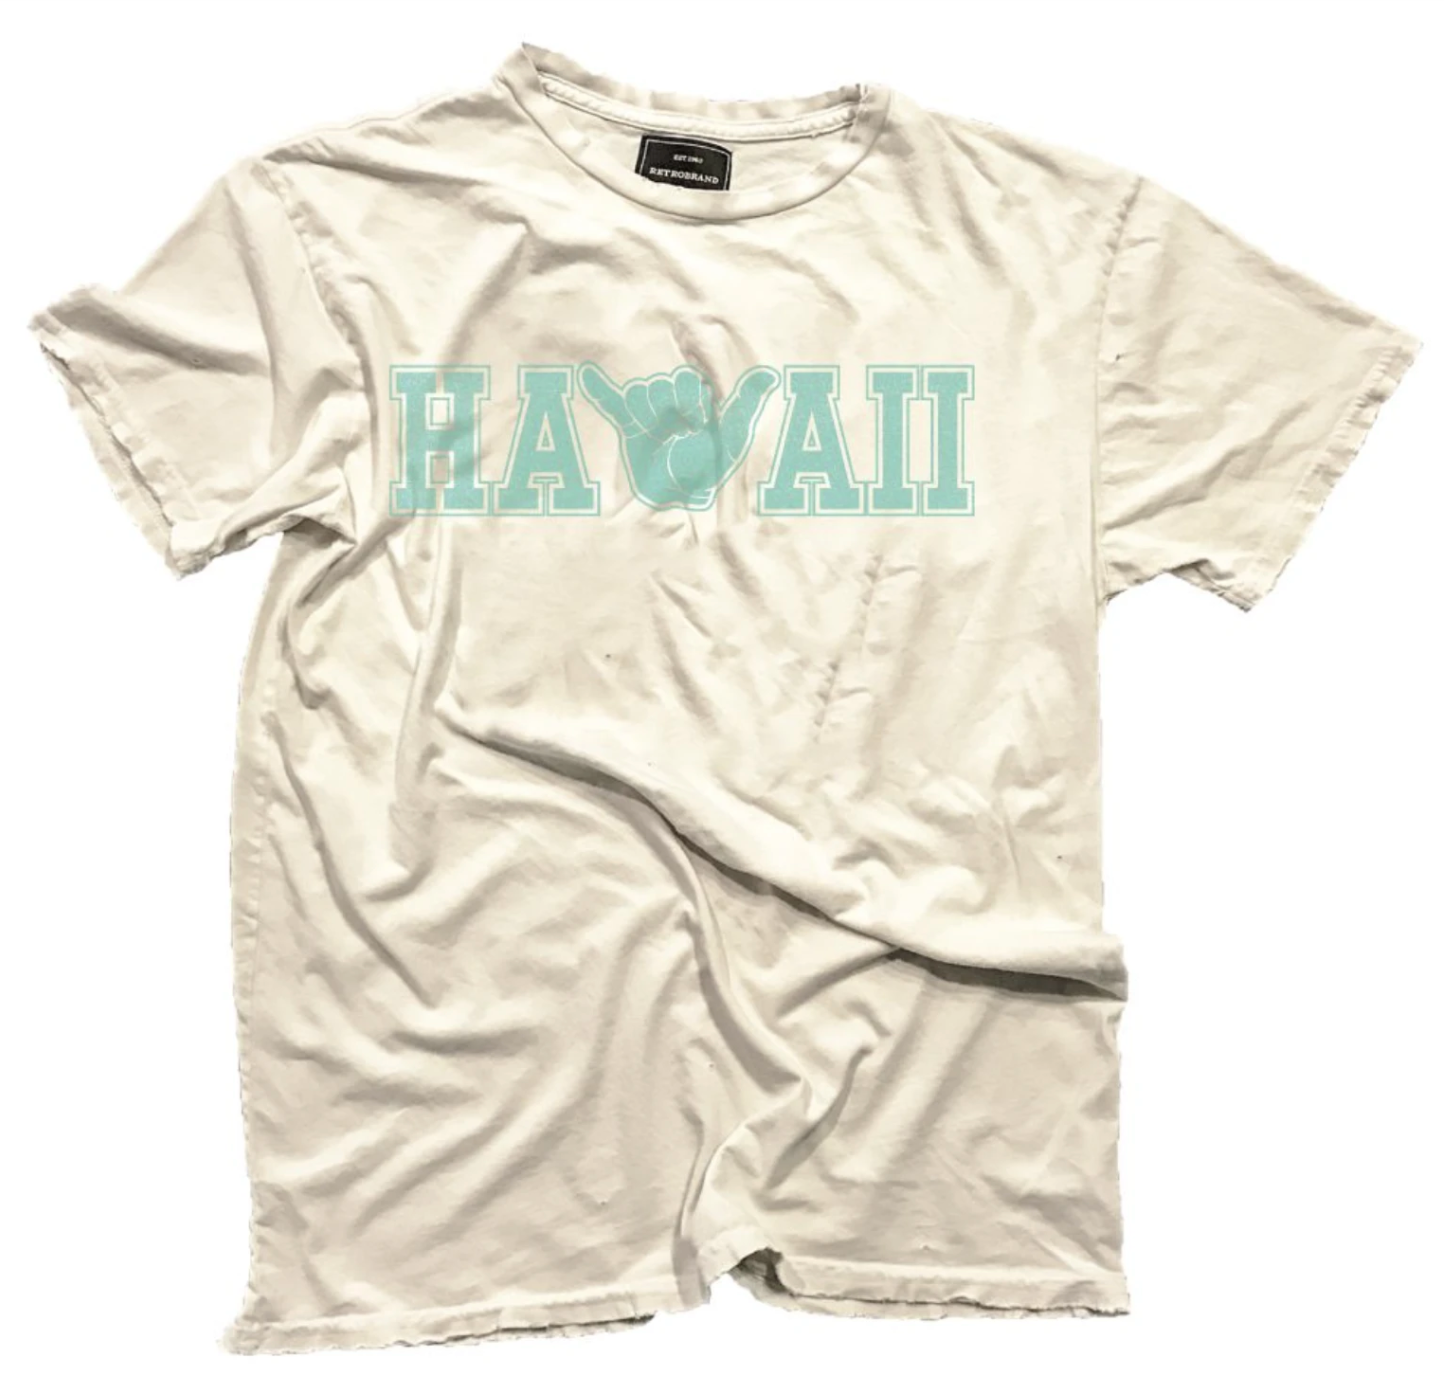 Hawaii (with the shaka hand sign as the W) in faded blue/green print on our 100% cotton Black Label short sleeve tee in antique white